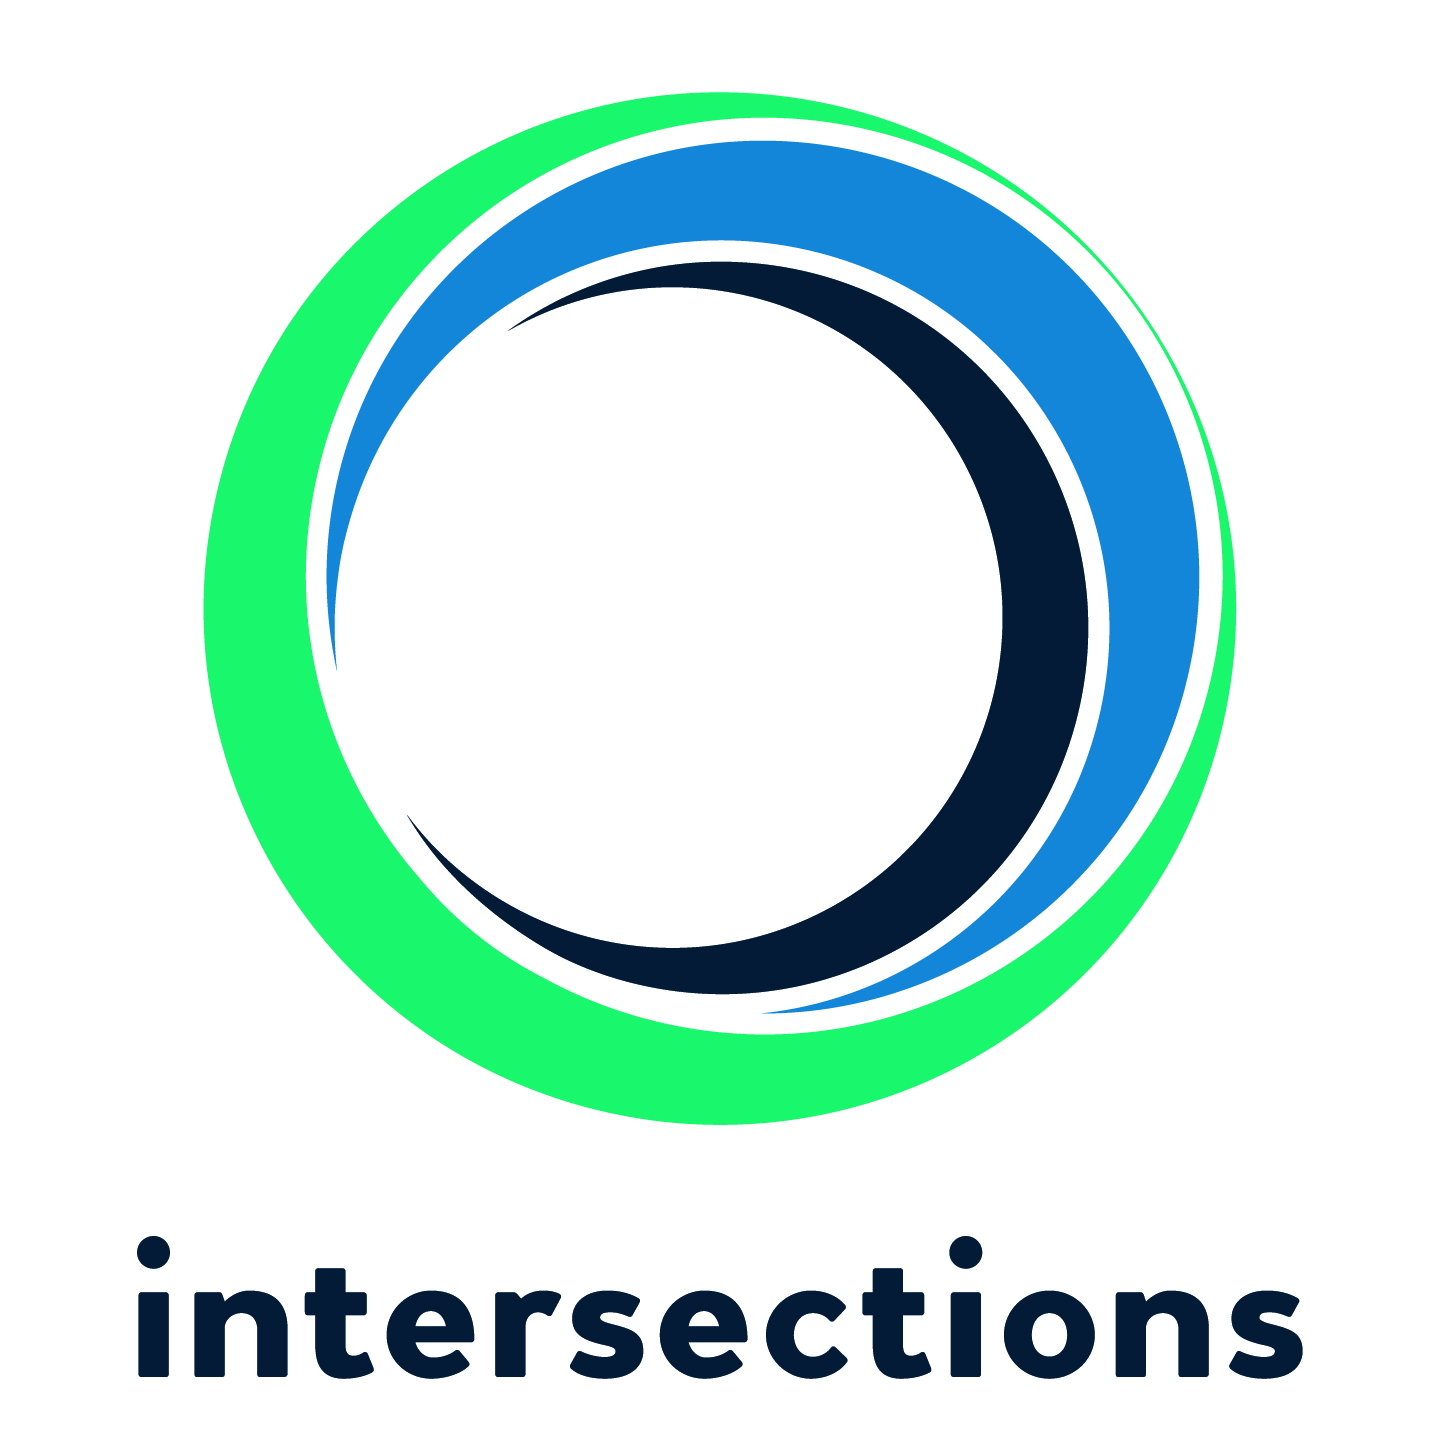 intersections design element